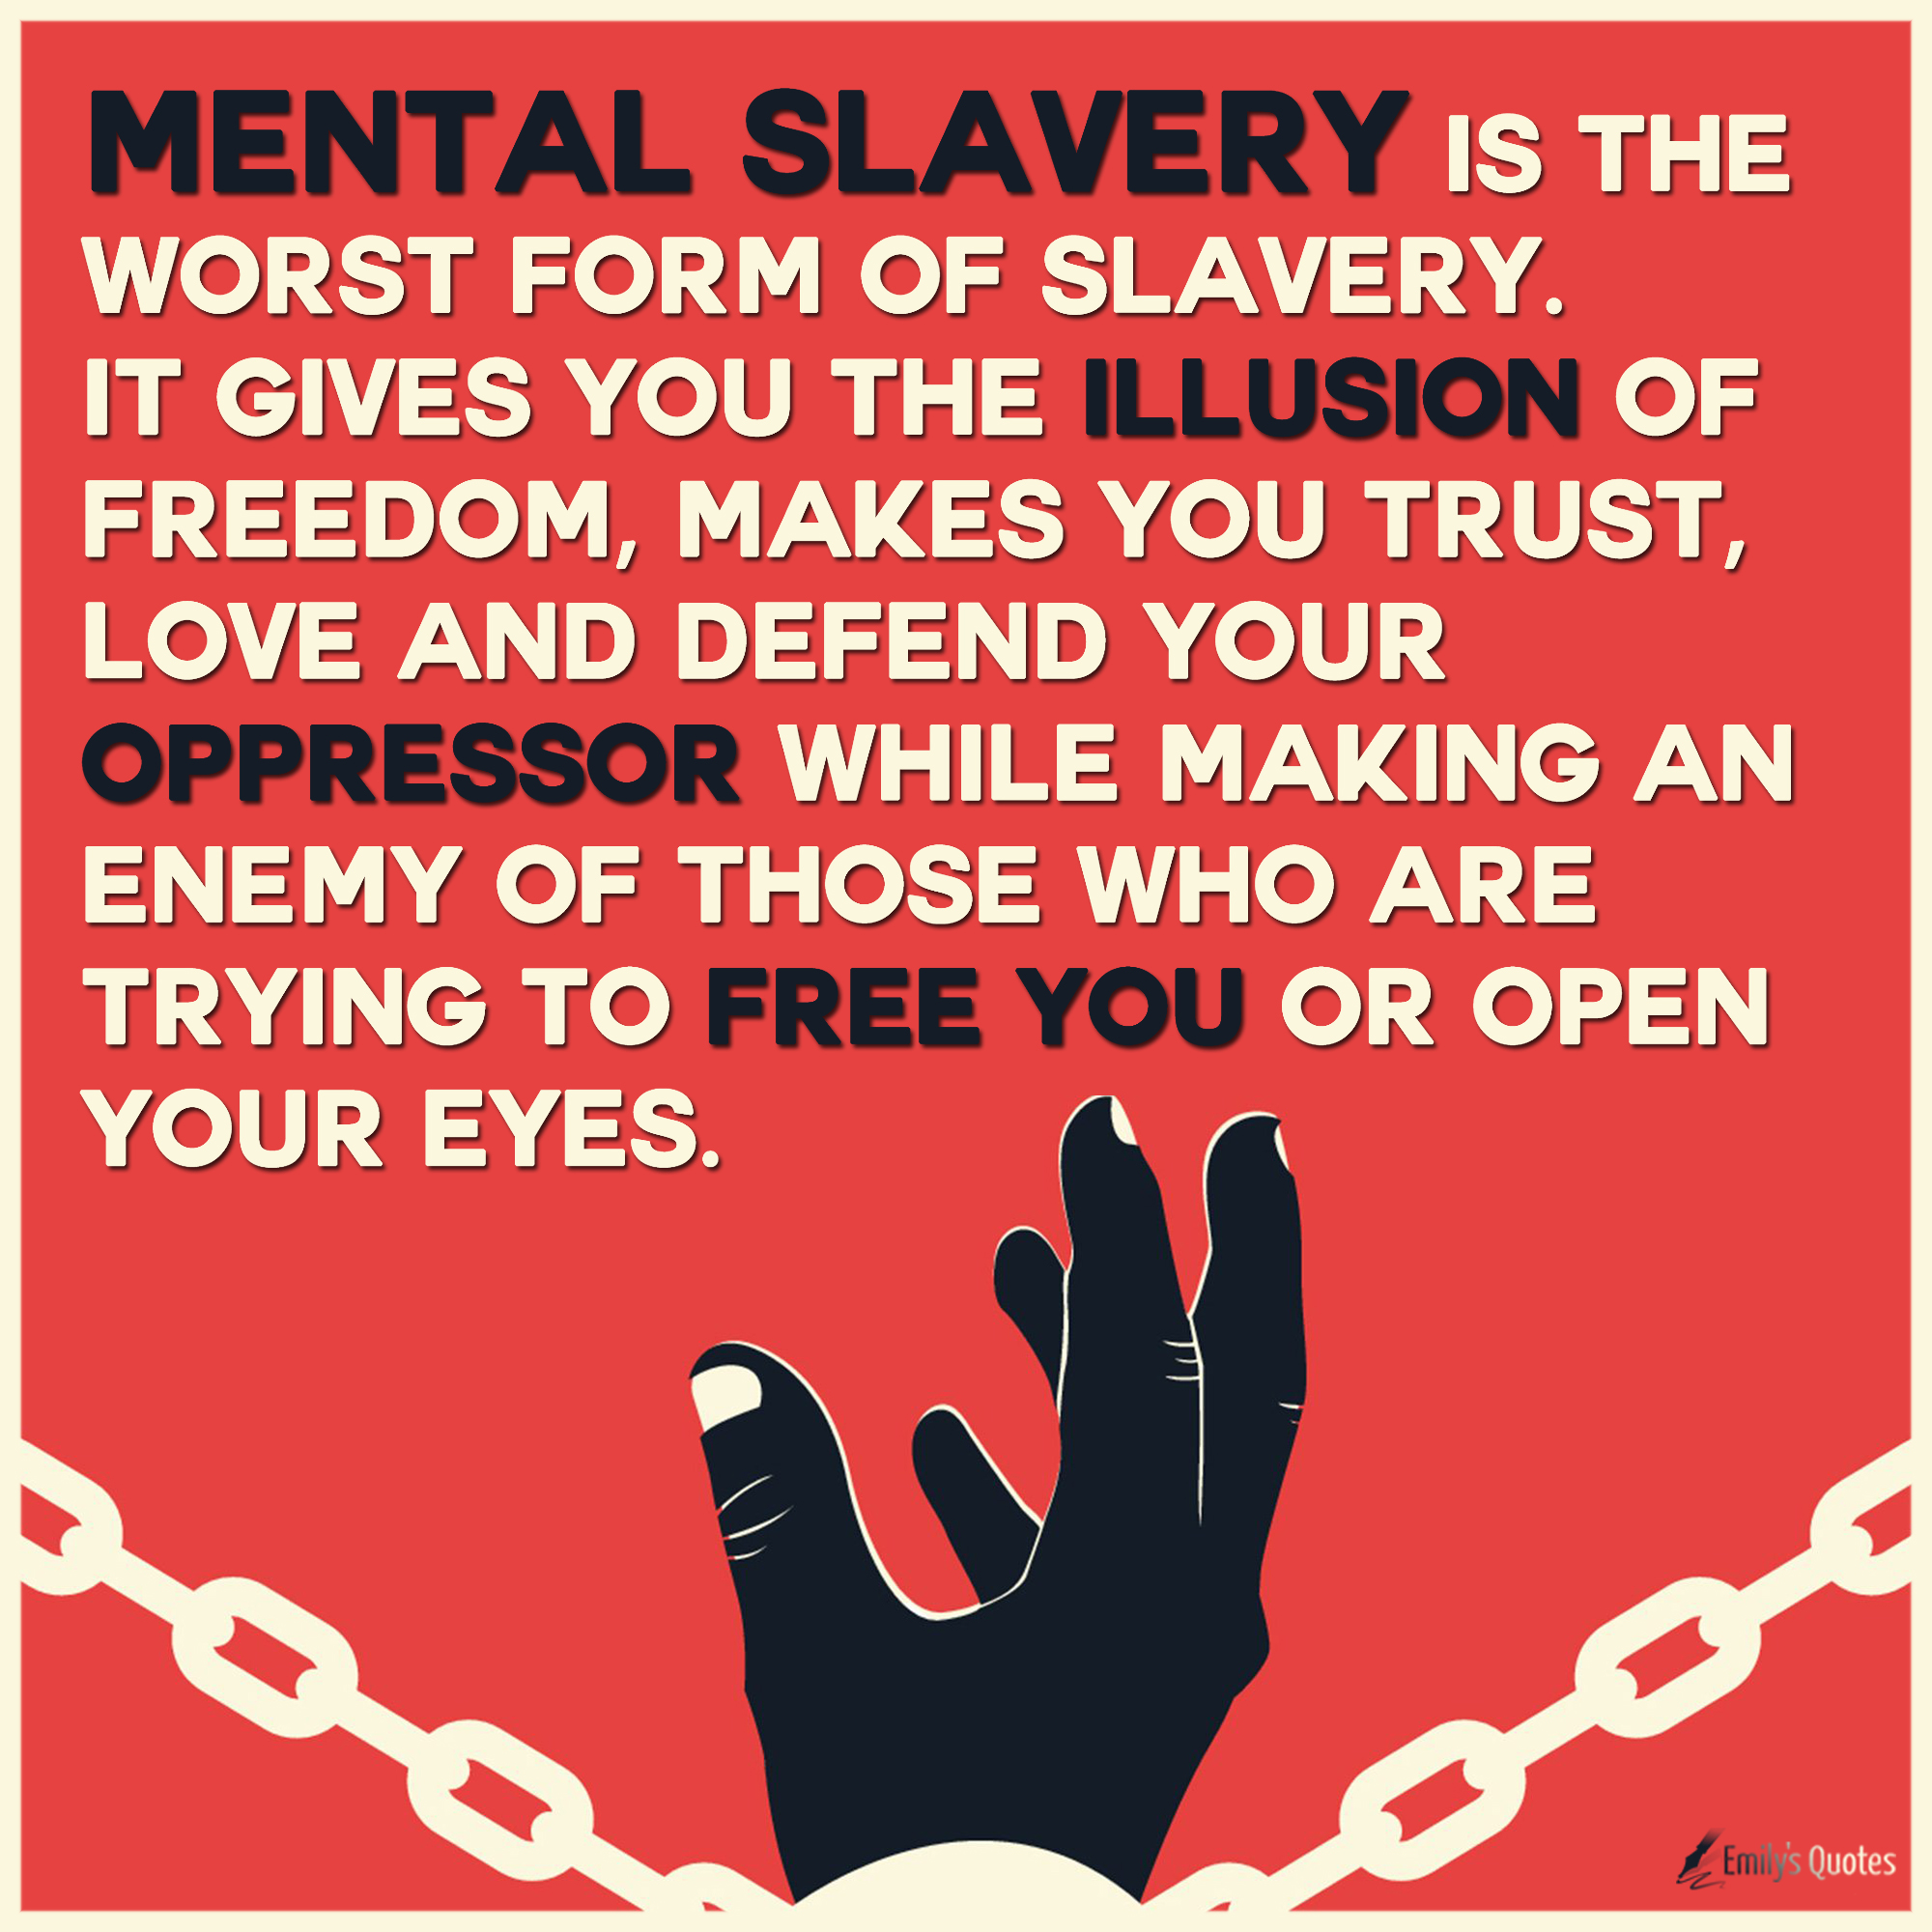 Mental slavery is the worst form of Slavery. It gives you the illusion of freedom